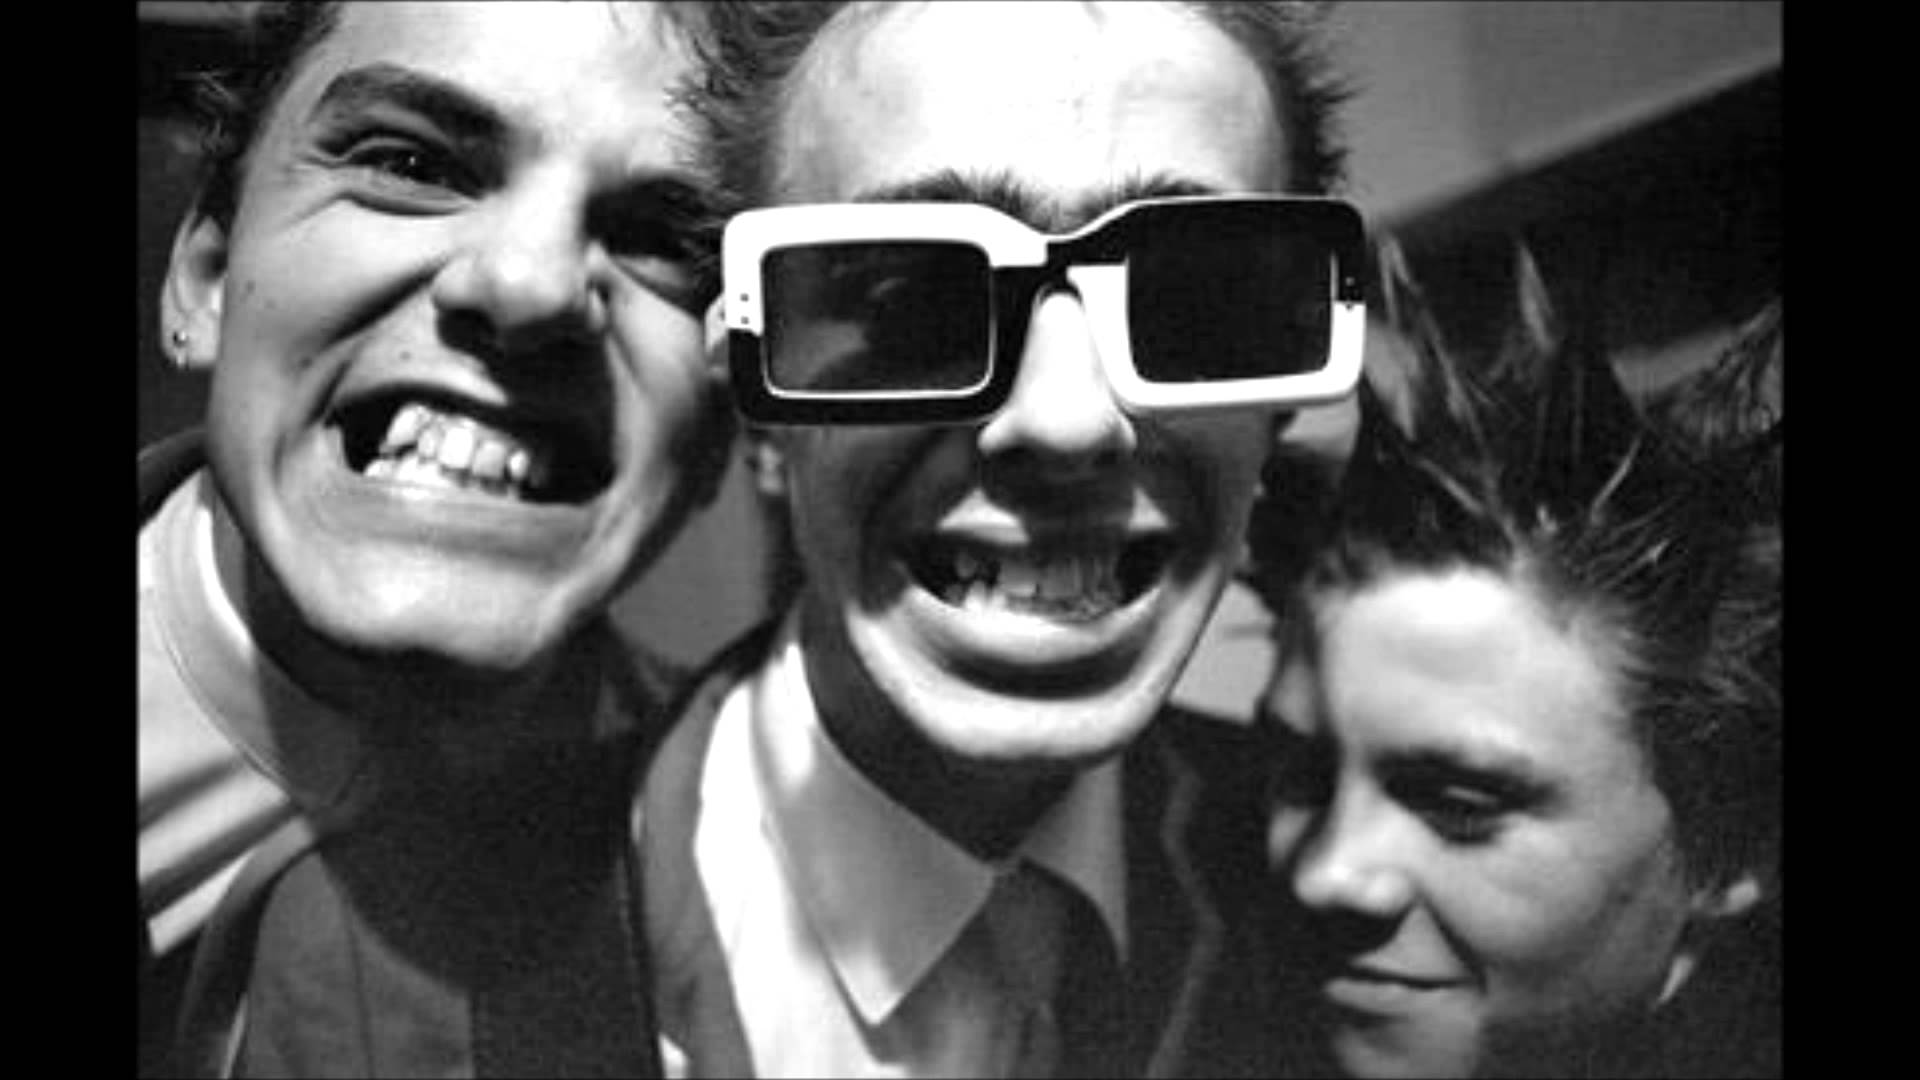 The toy dolls - Back in 79 (Instrumental) - YouTube